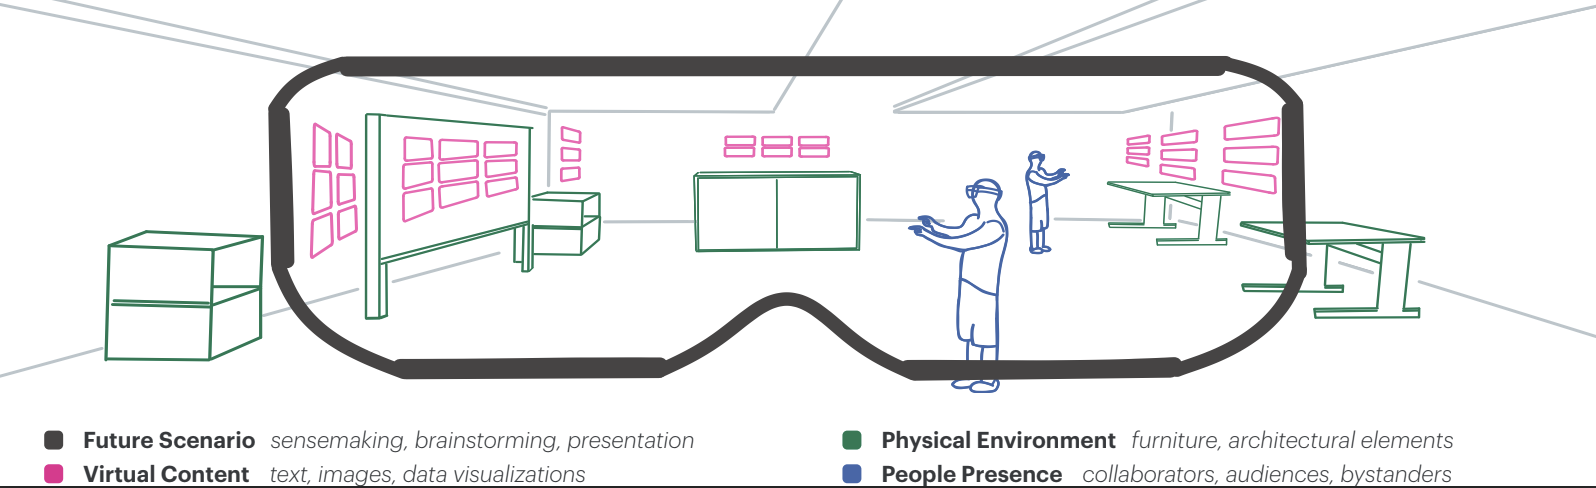 Exploring Spatial Organization Strategies for Virtual Content in Mixed Reality Environments